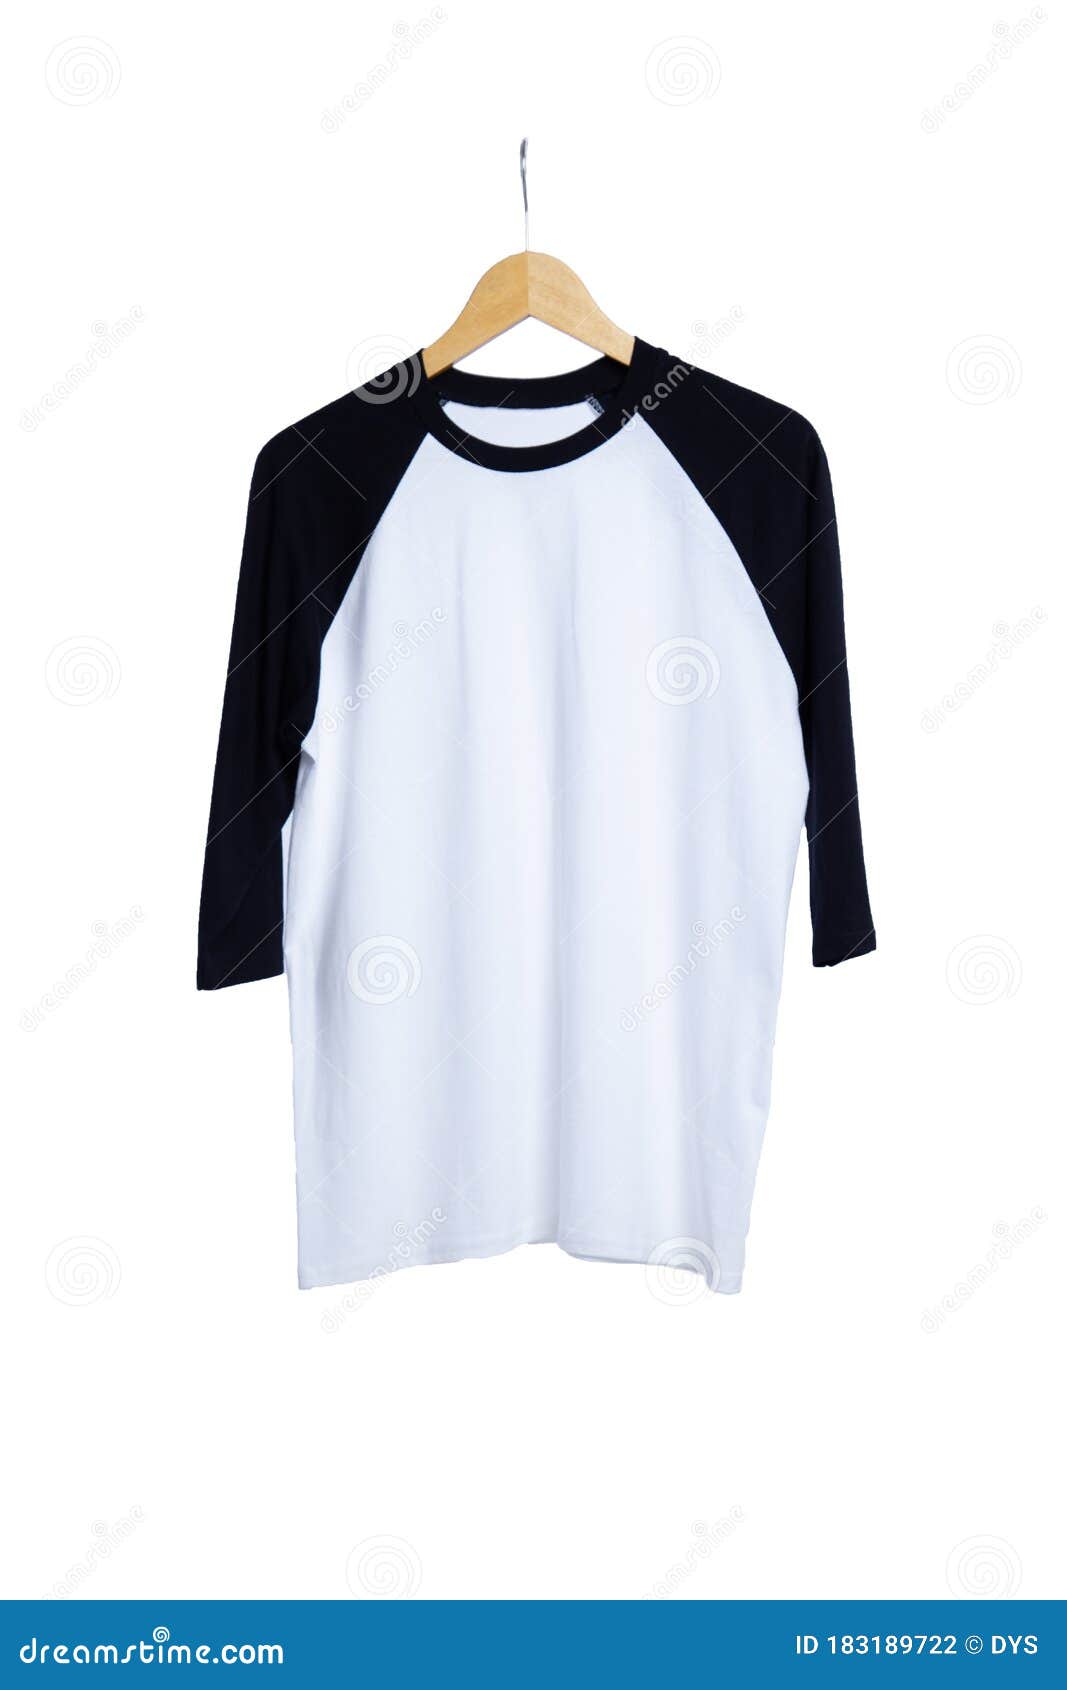 Download Blank T Shirt Raglan 3/4 Sleeves Front View With Black And ...